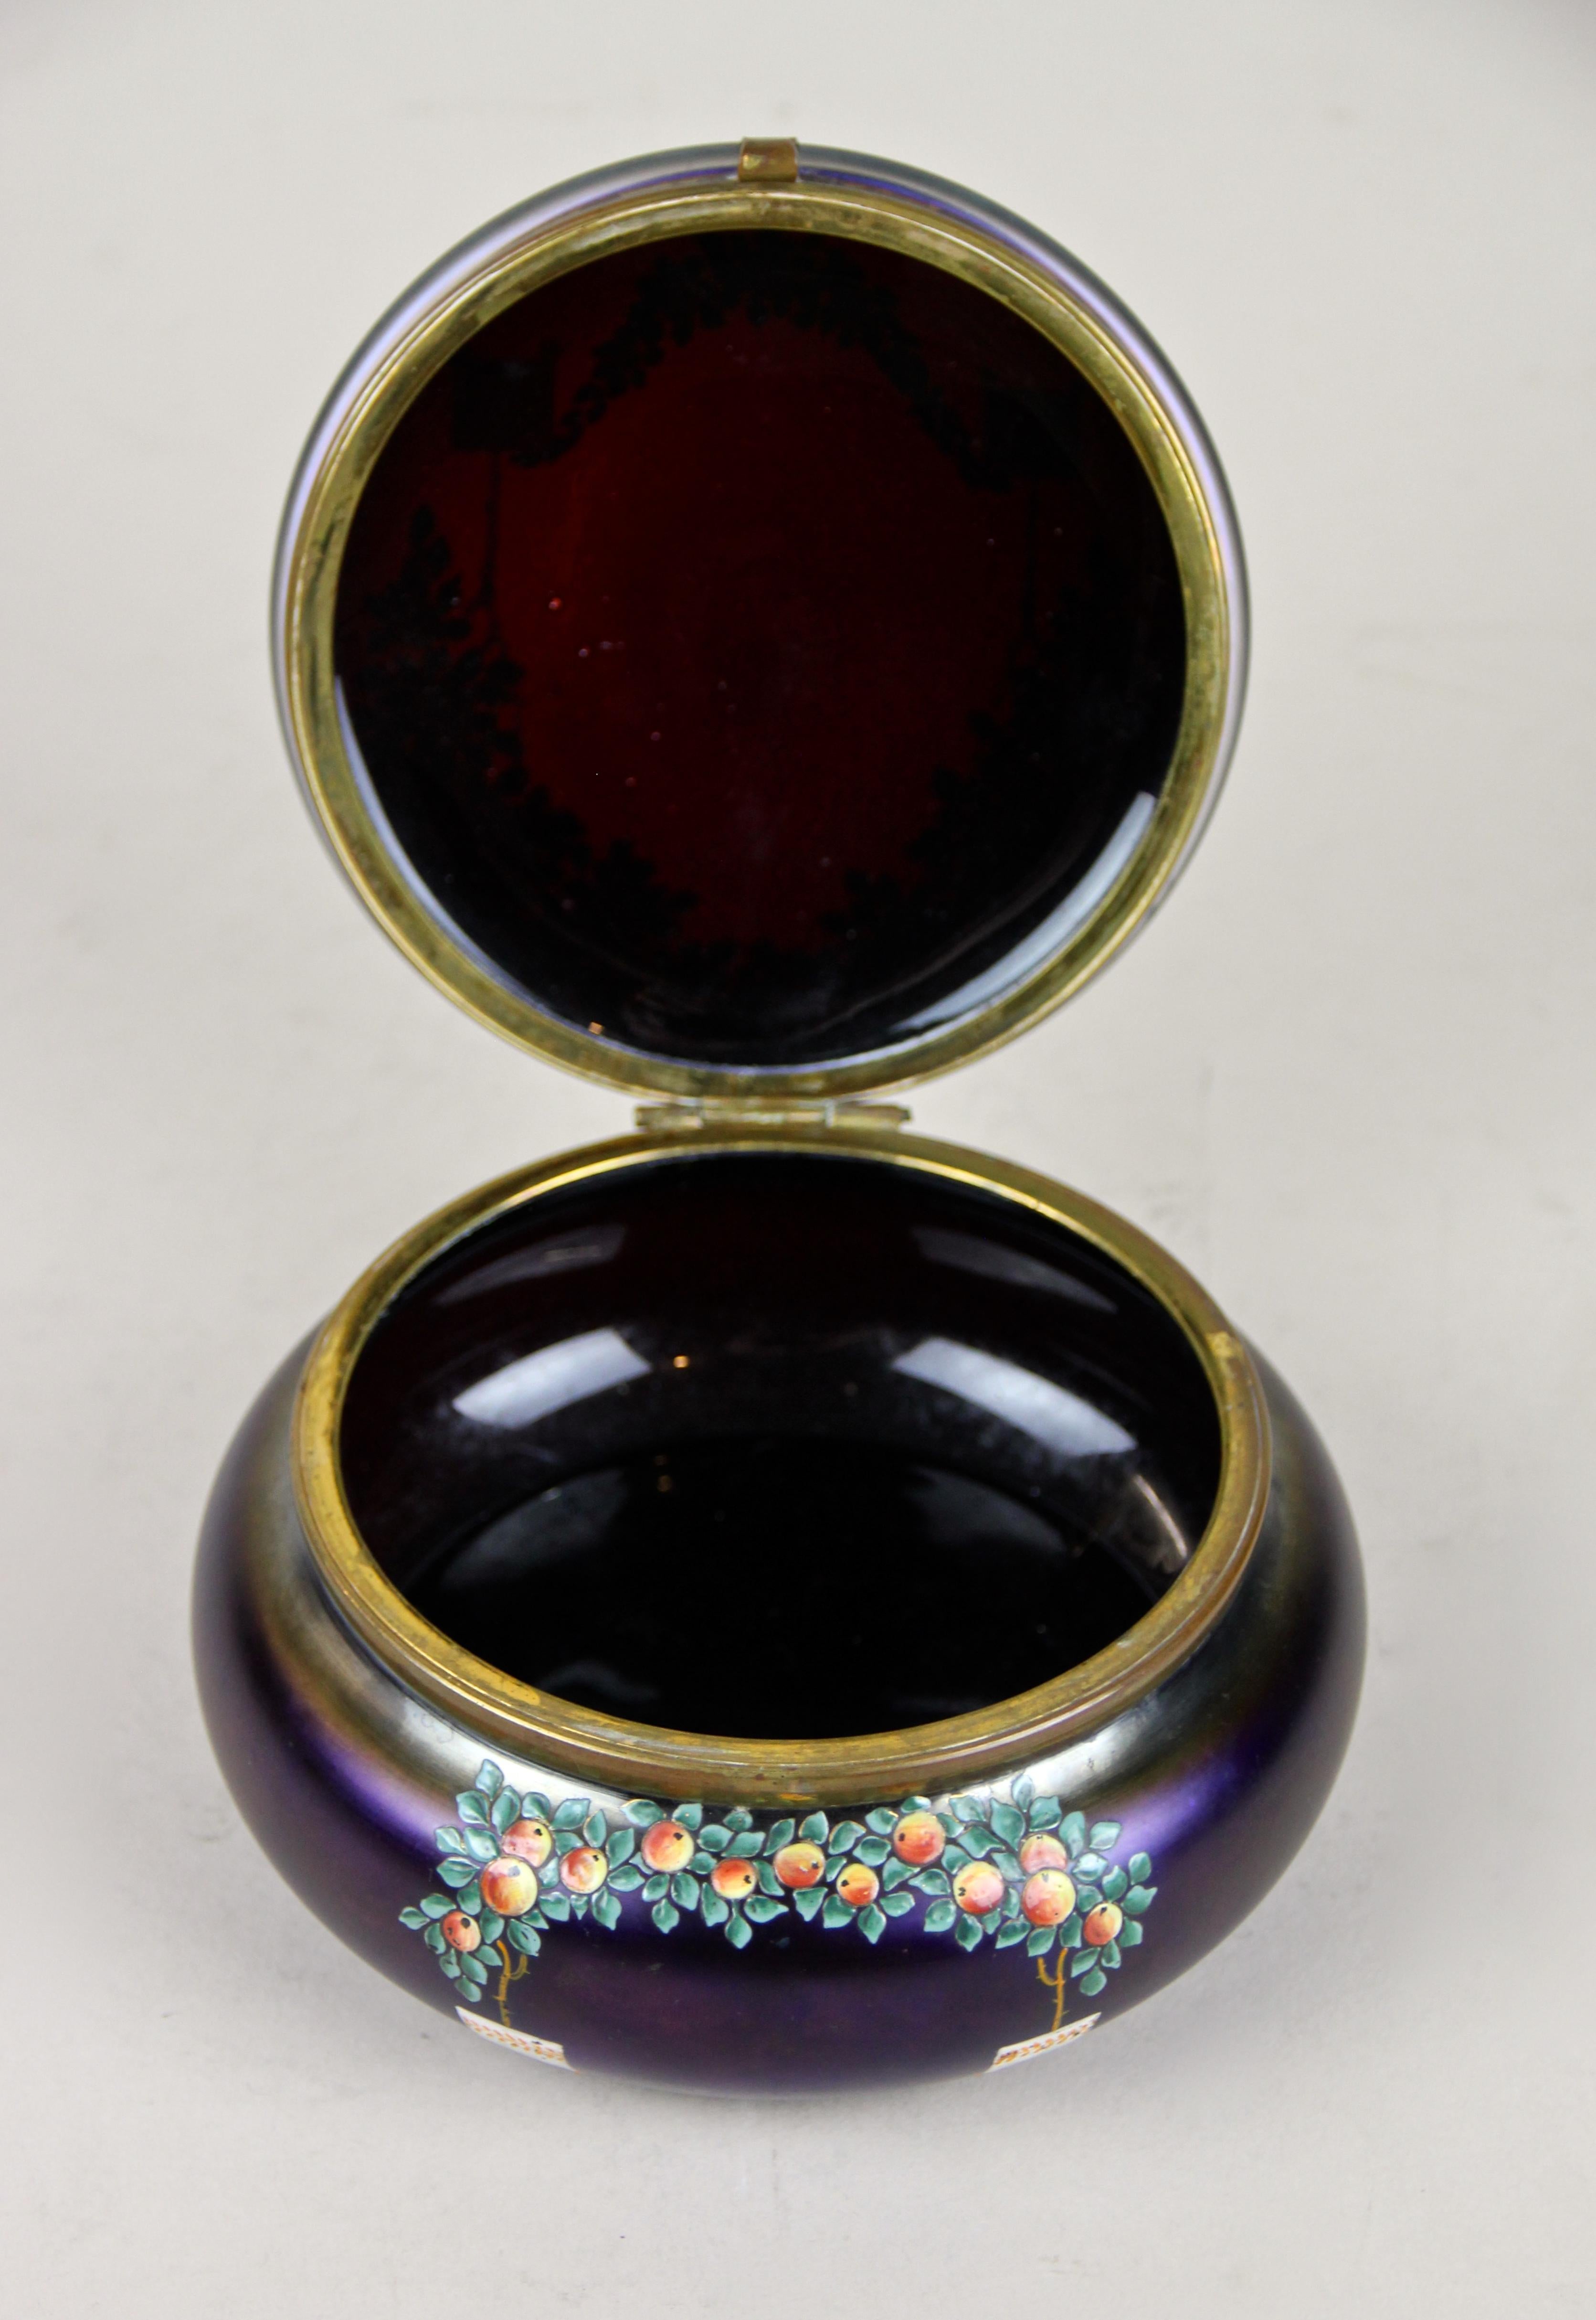 Czech Iriscident Glass Box with Lid and Enamel Paintings, Bohemia, circa 1910